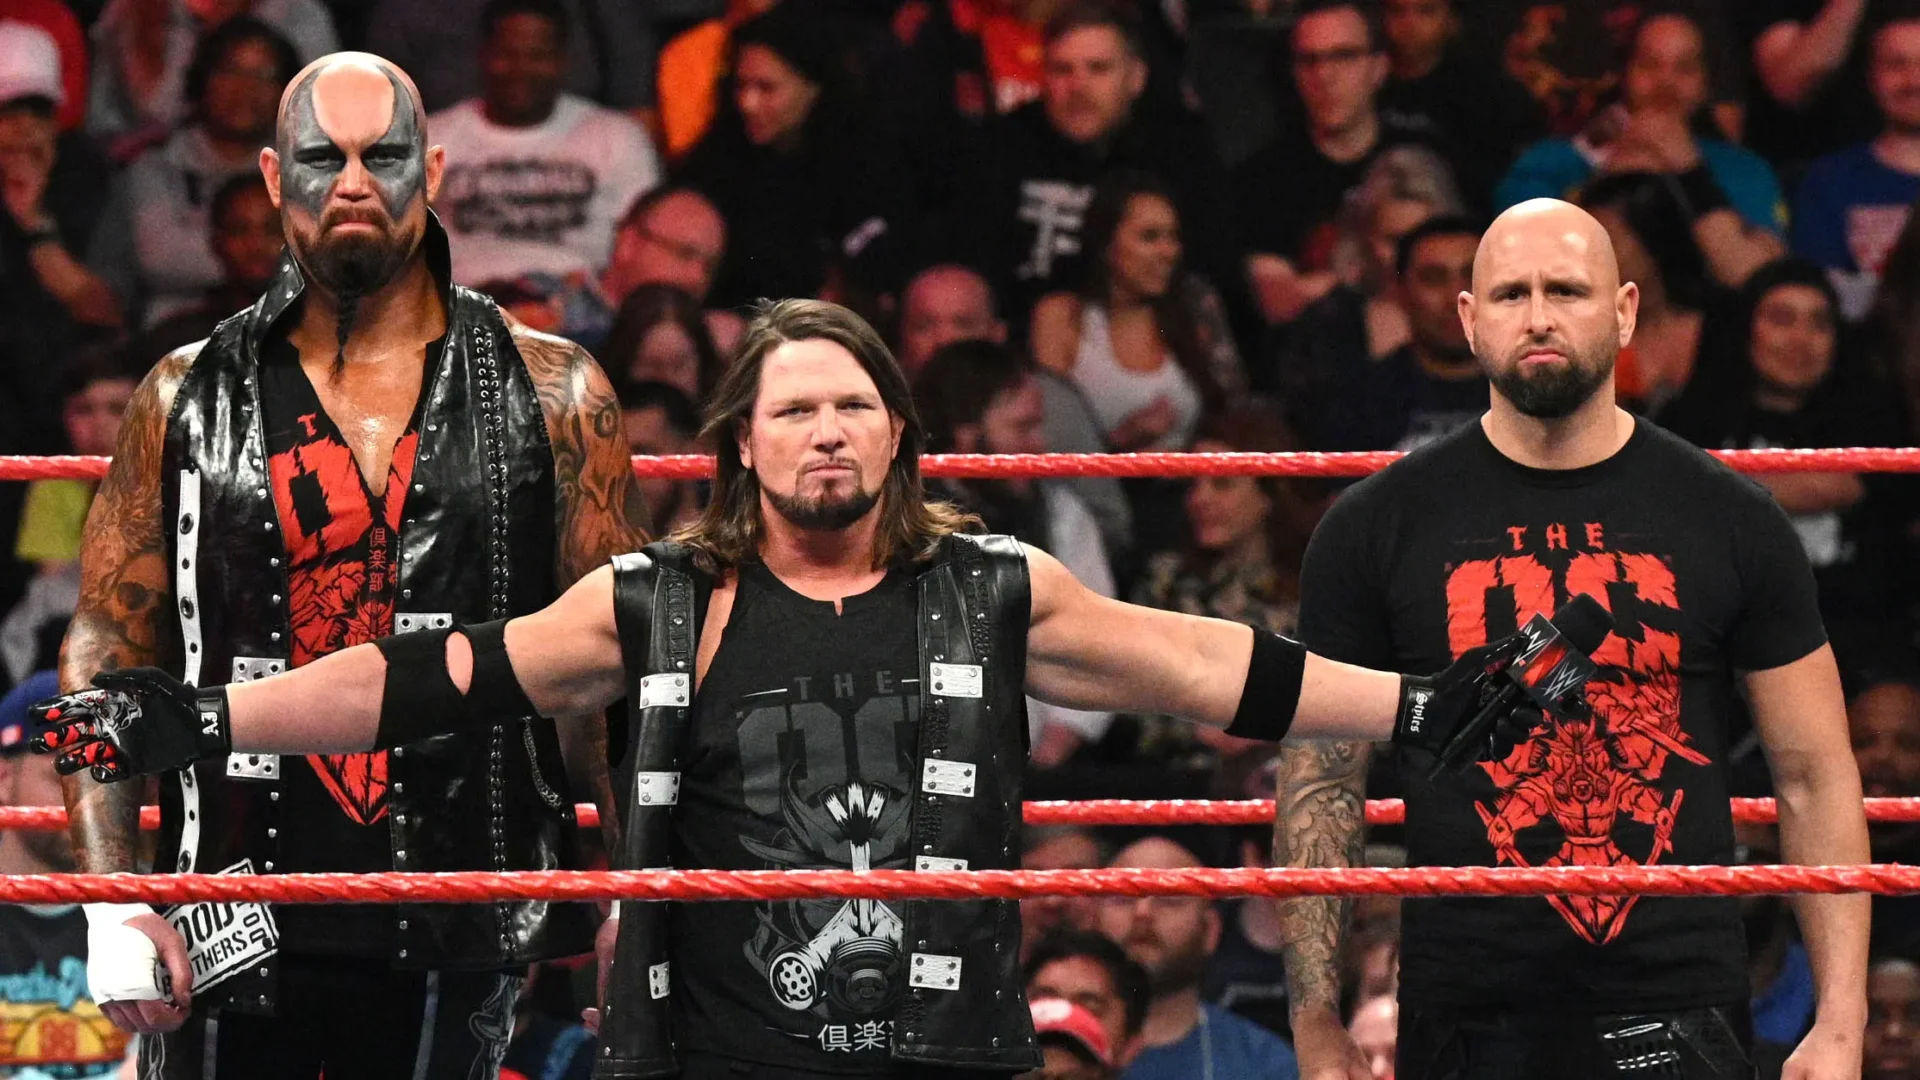 Luke Gallows & Karl Anderson Reportedly Returning To WWE